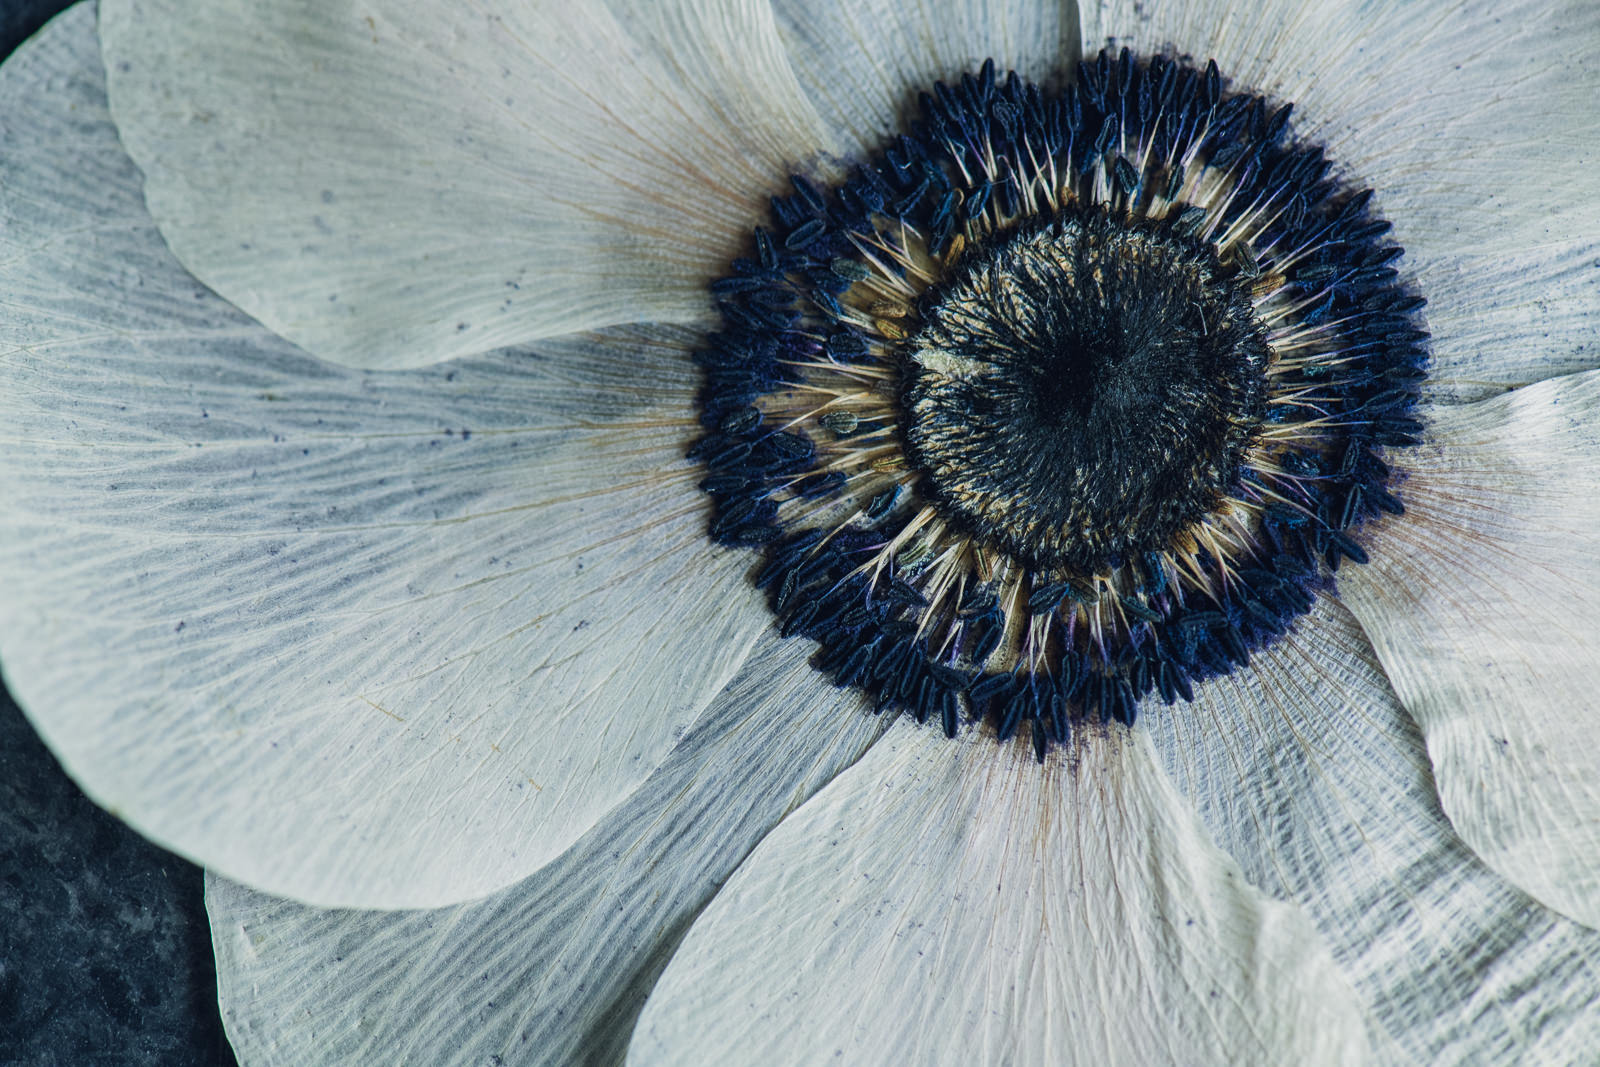 up close view of a pressed anemone flower with deep blue center